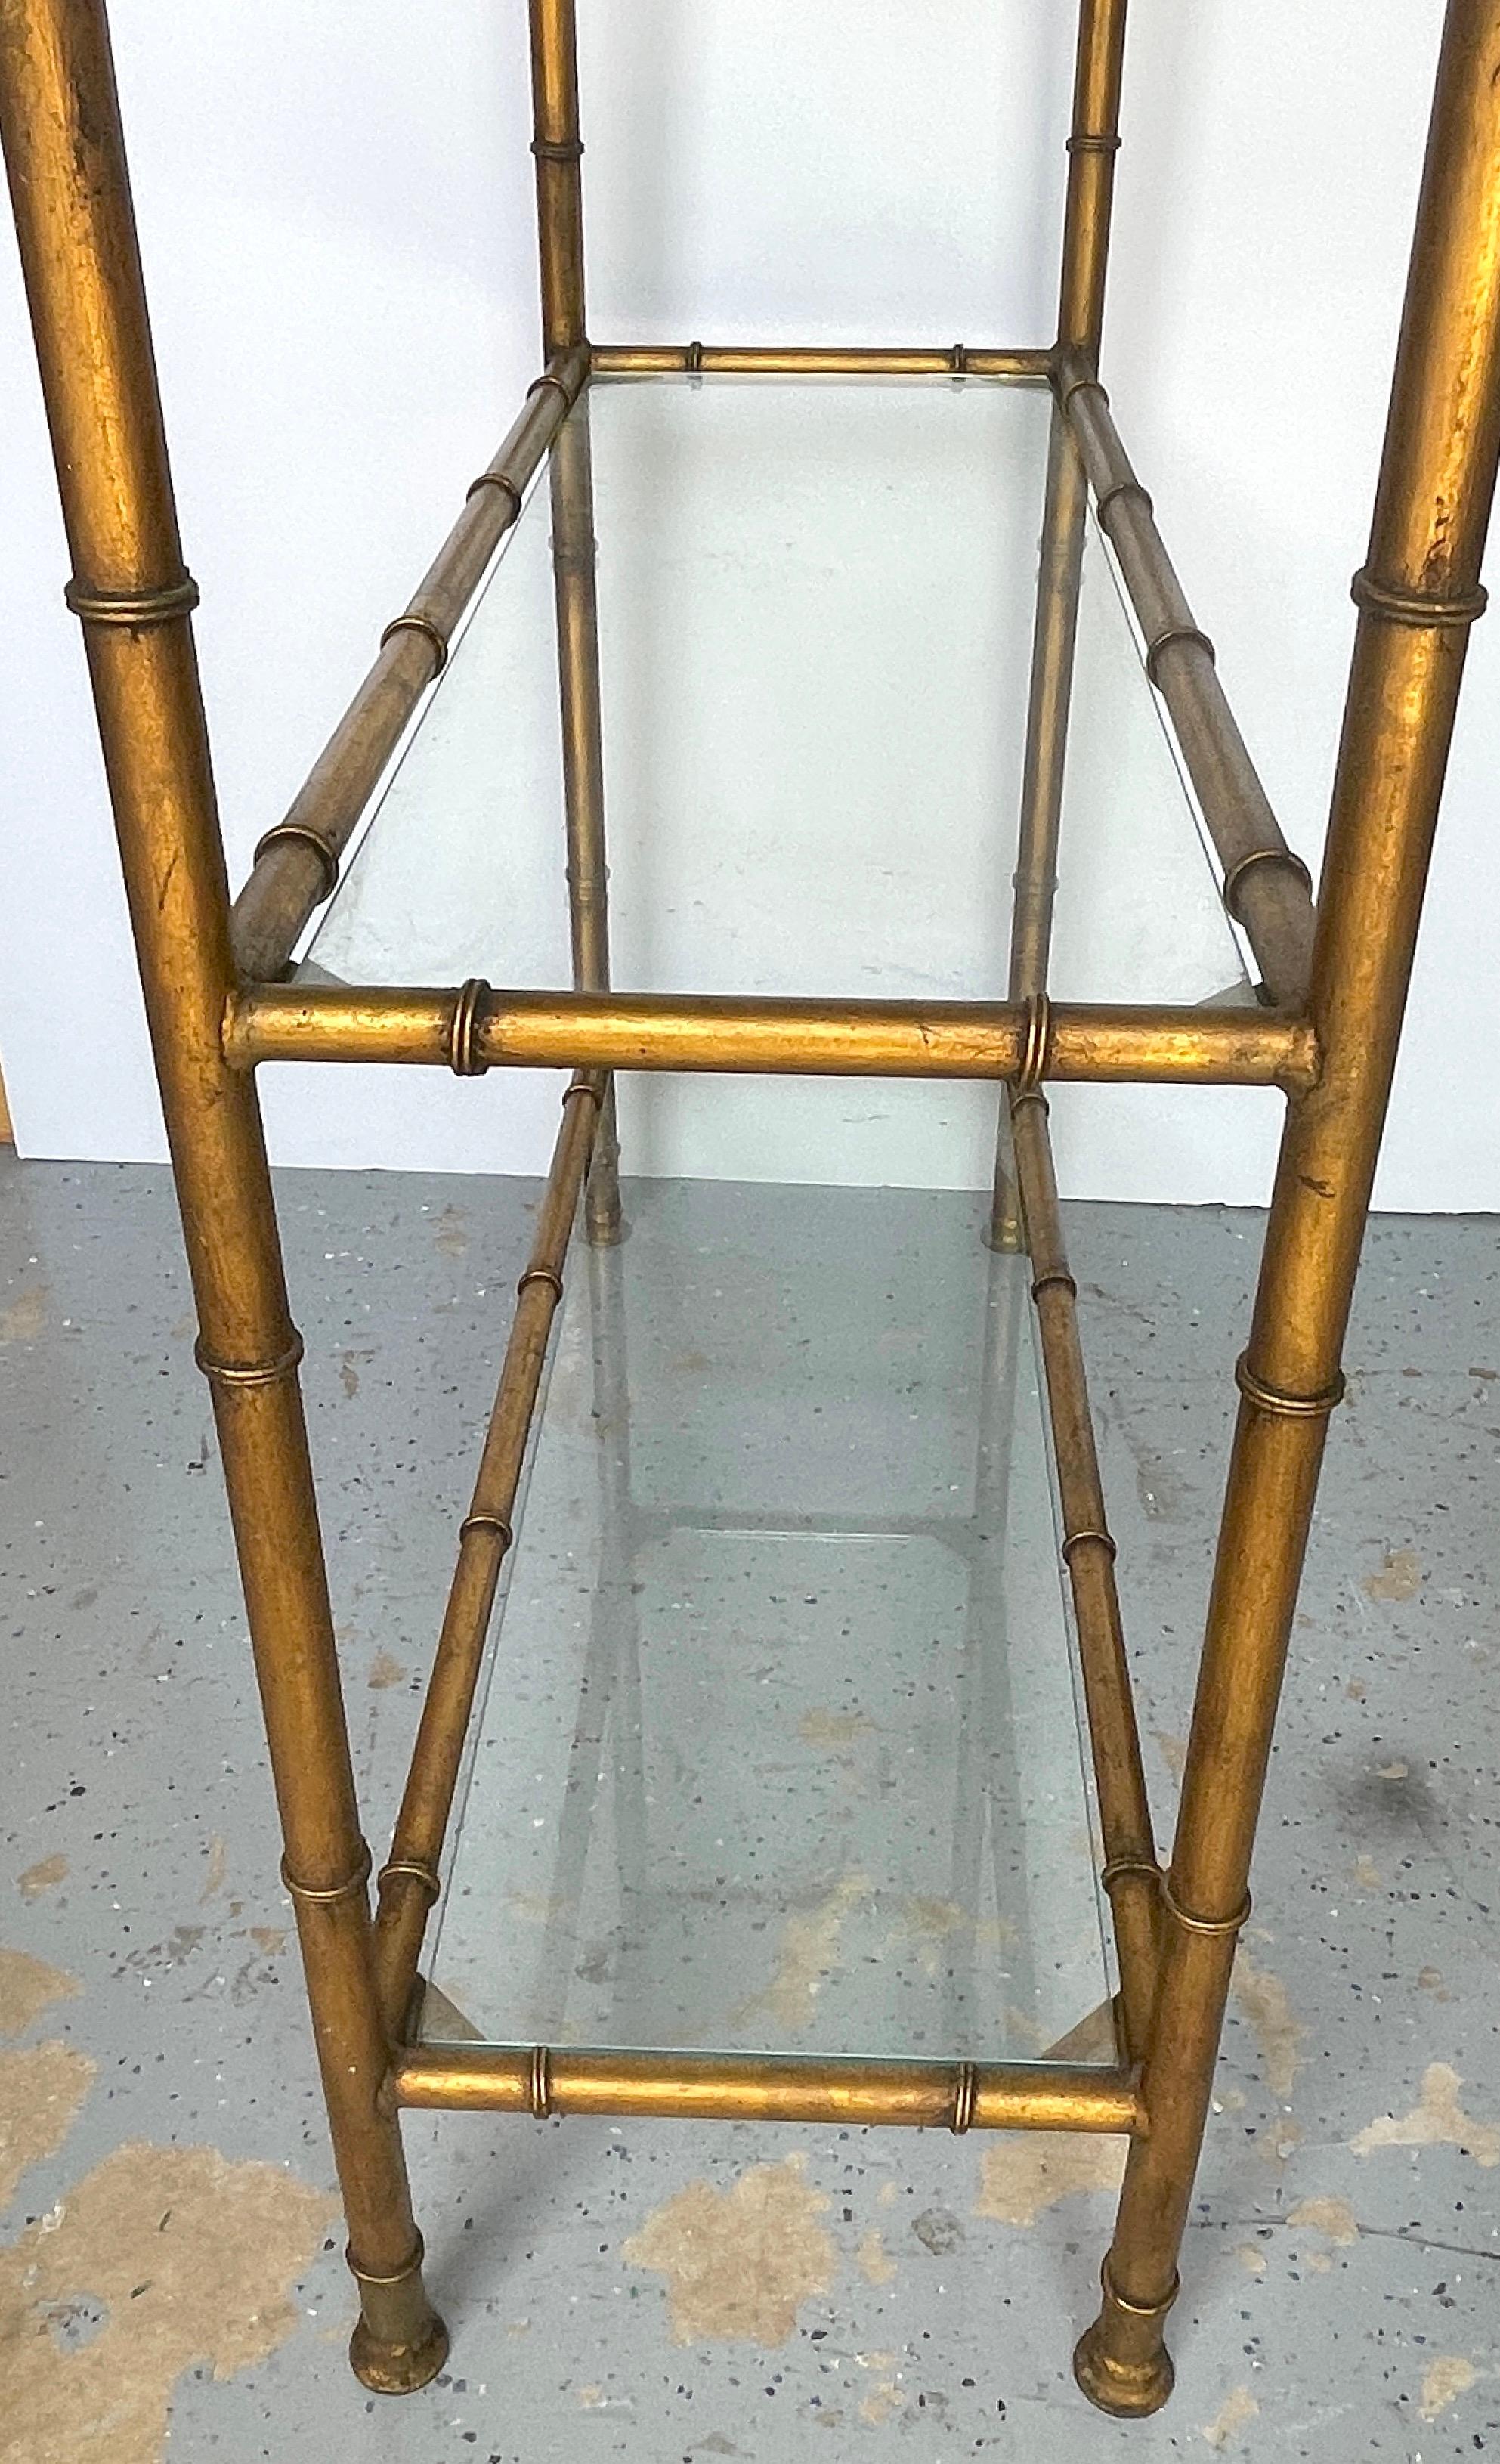 Italian Neoclassical Gilt Faux Bamboo 5-Tier Etagere with Urn Finials, C. 1960s In Good Condition For Sale In West Palm Beach, FL